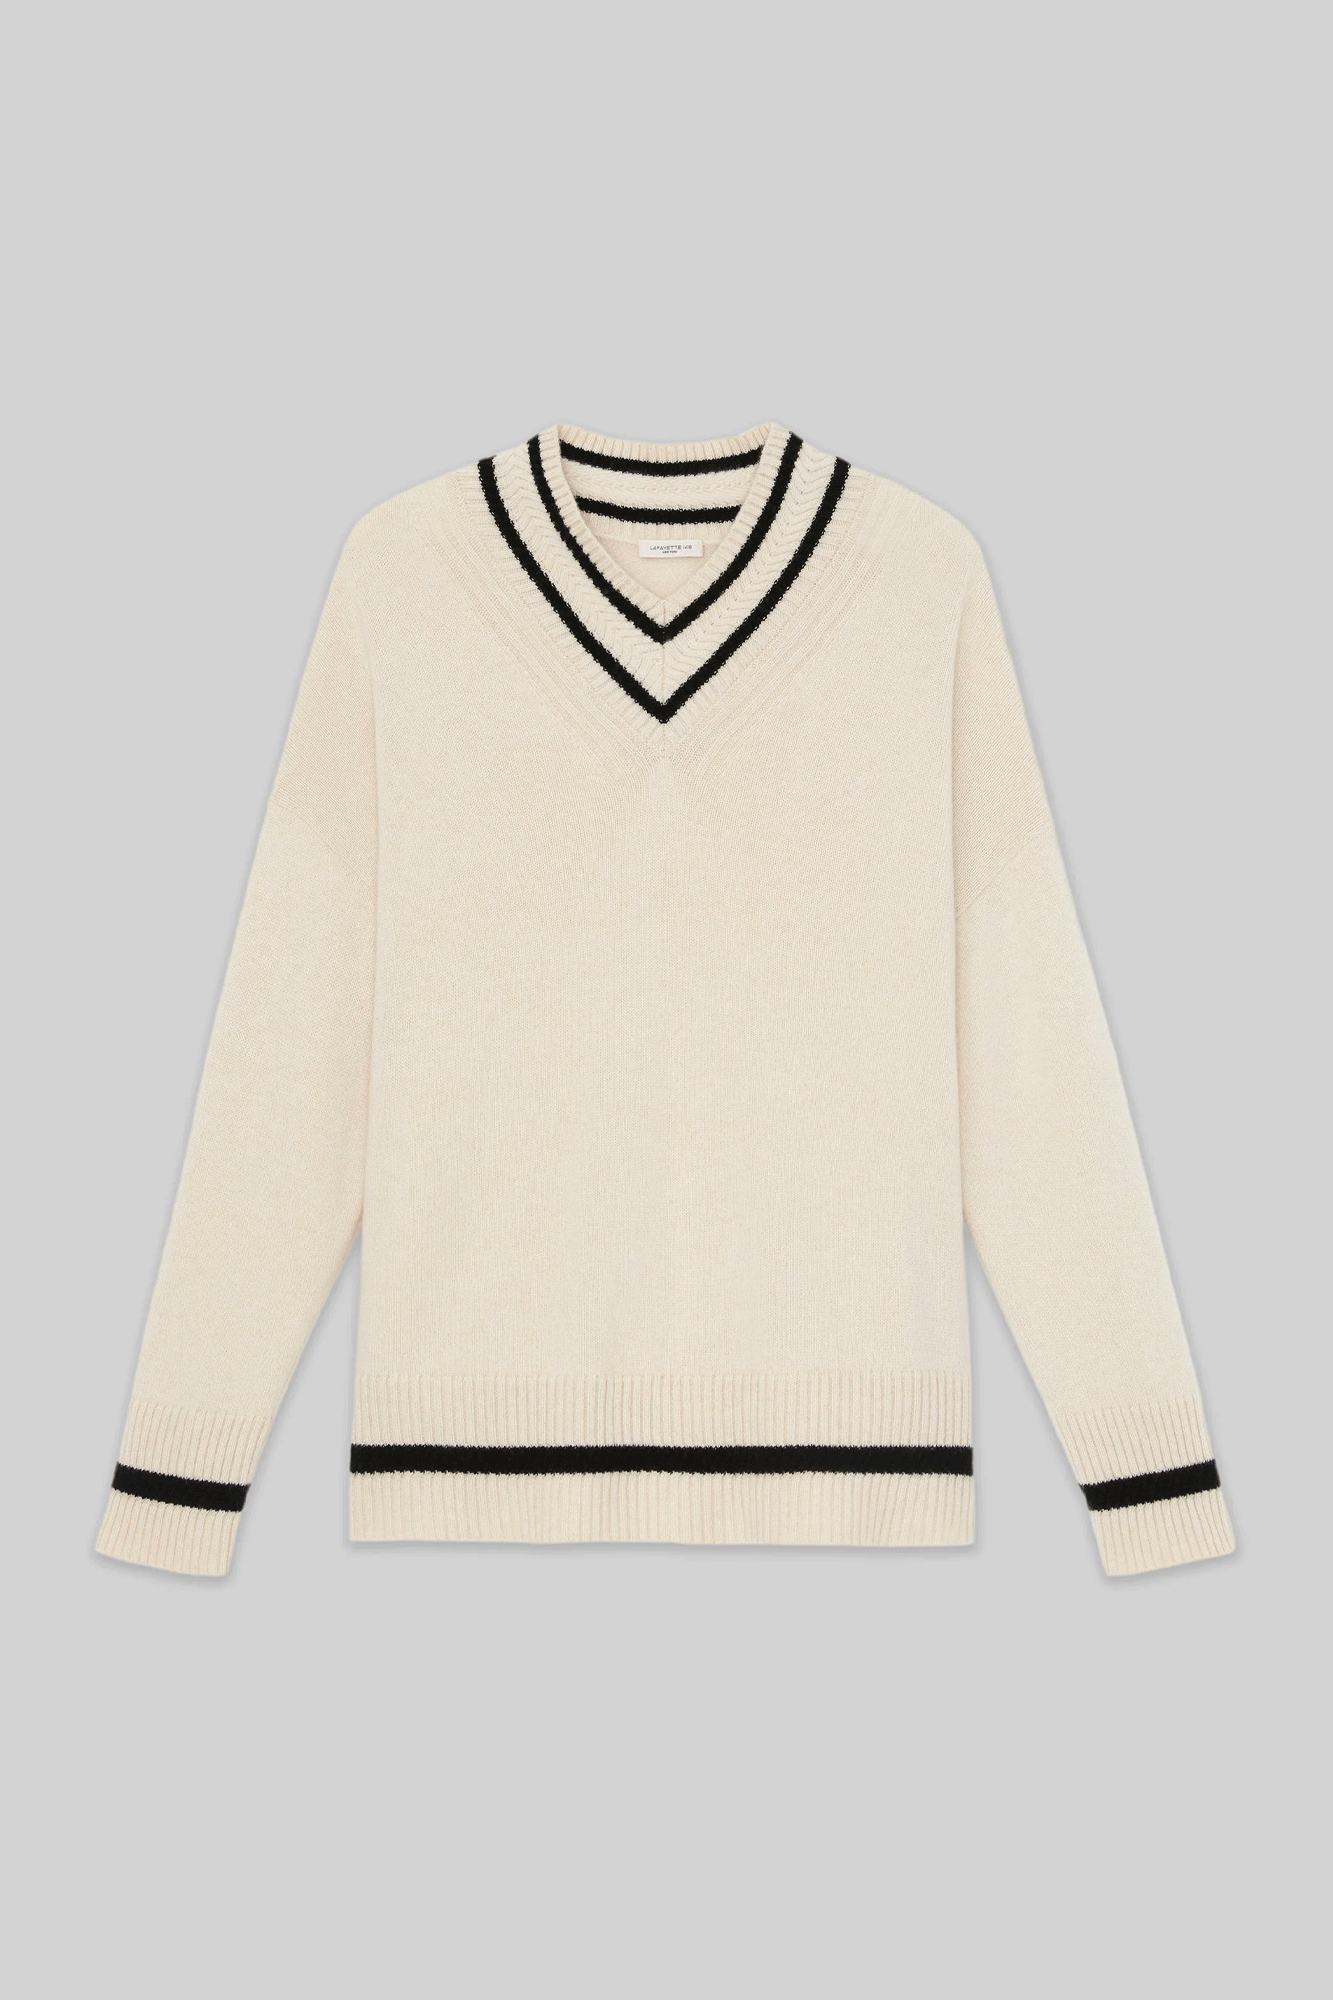 This Stripe Trim V-Neck Sweater from Lafayette 148 is crafted with precision and features classic Ivy League sartorial codes. It is expertly knit using luxurious 100% cashmere and is adorned with collegiate striped detailing and stacked ribbed trim. The relaxed fit includes drop shoulders, angled seaming, and a high-low hem. Perfect for Fall 2023.